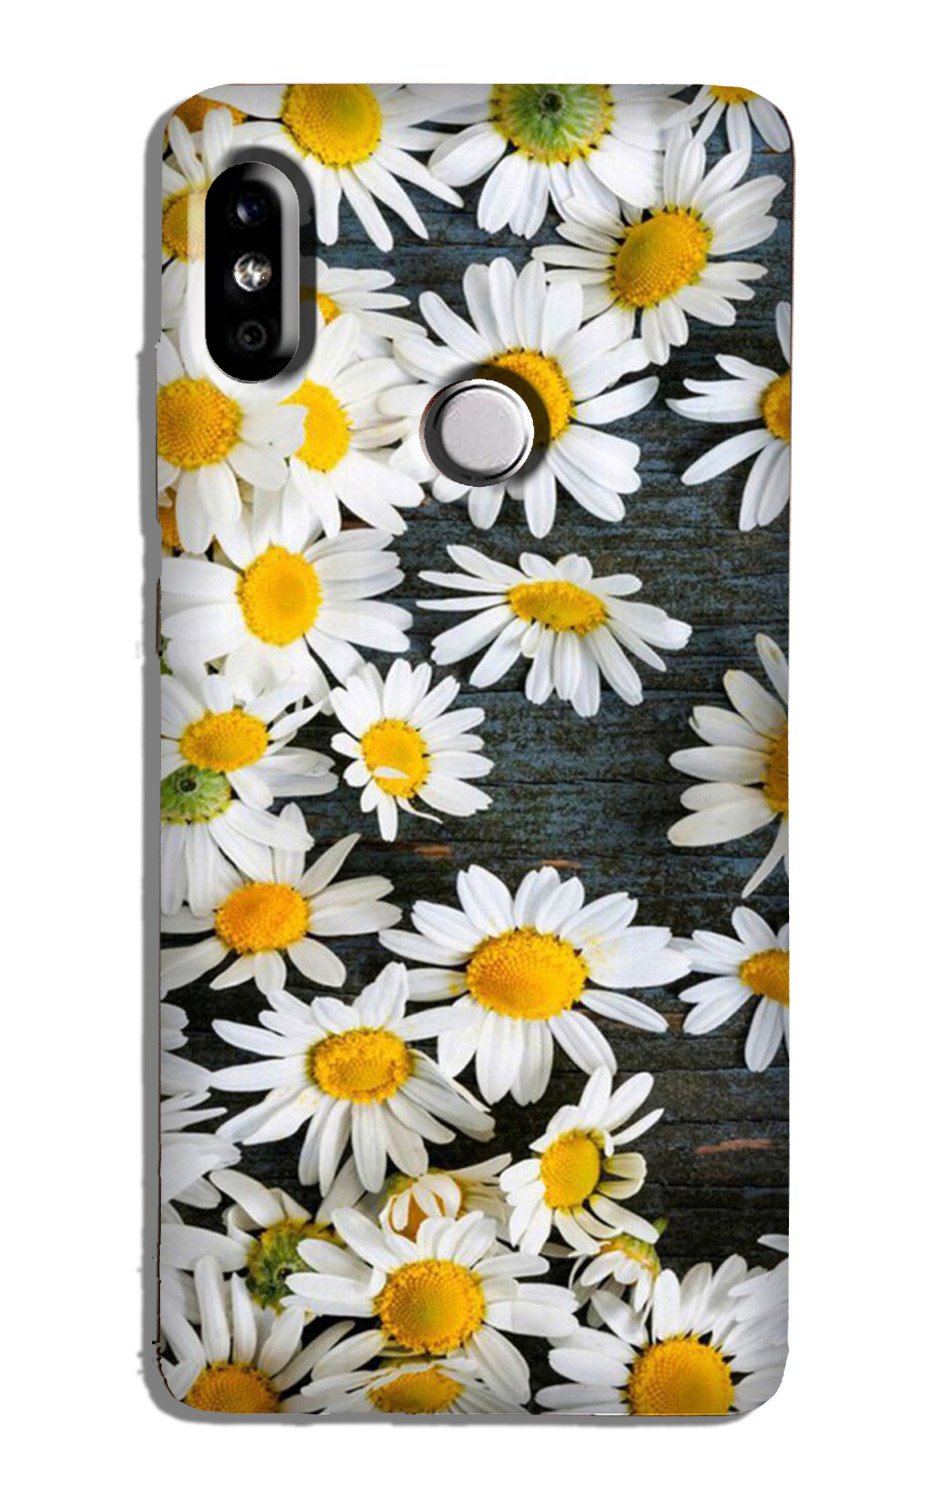 White flowers Case for Redmi Note 5 Pro